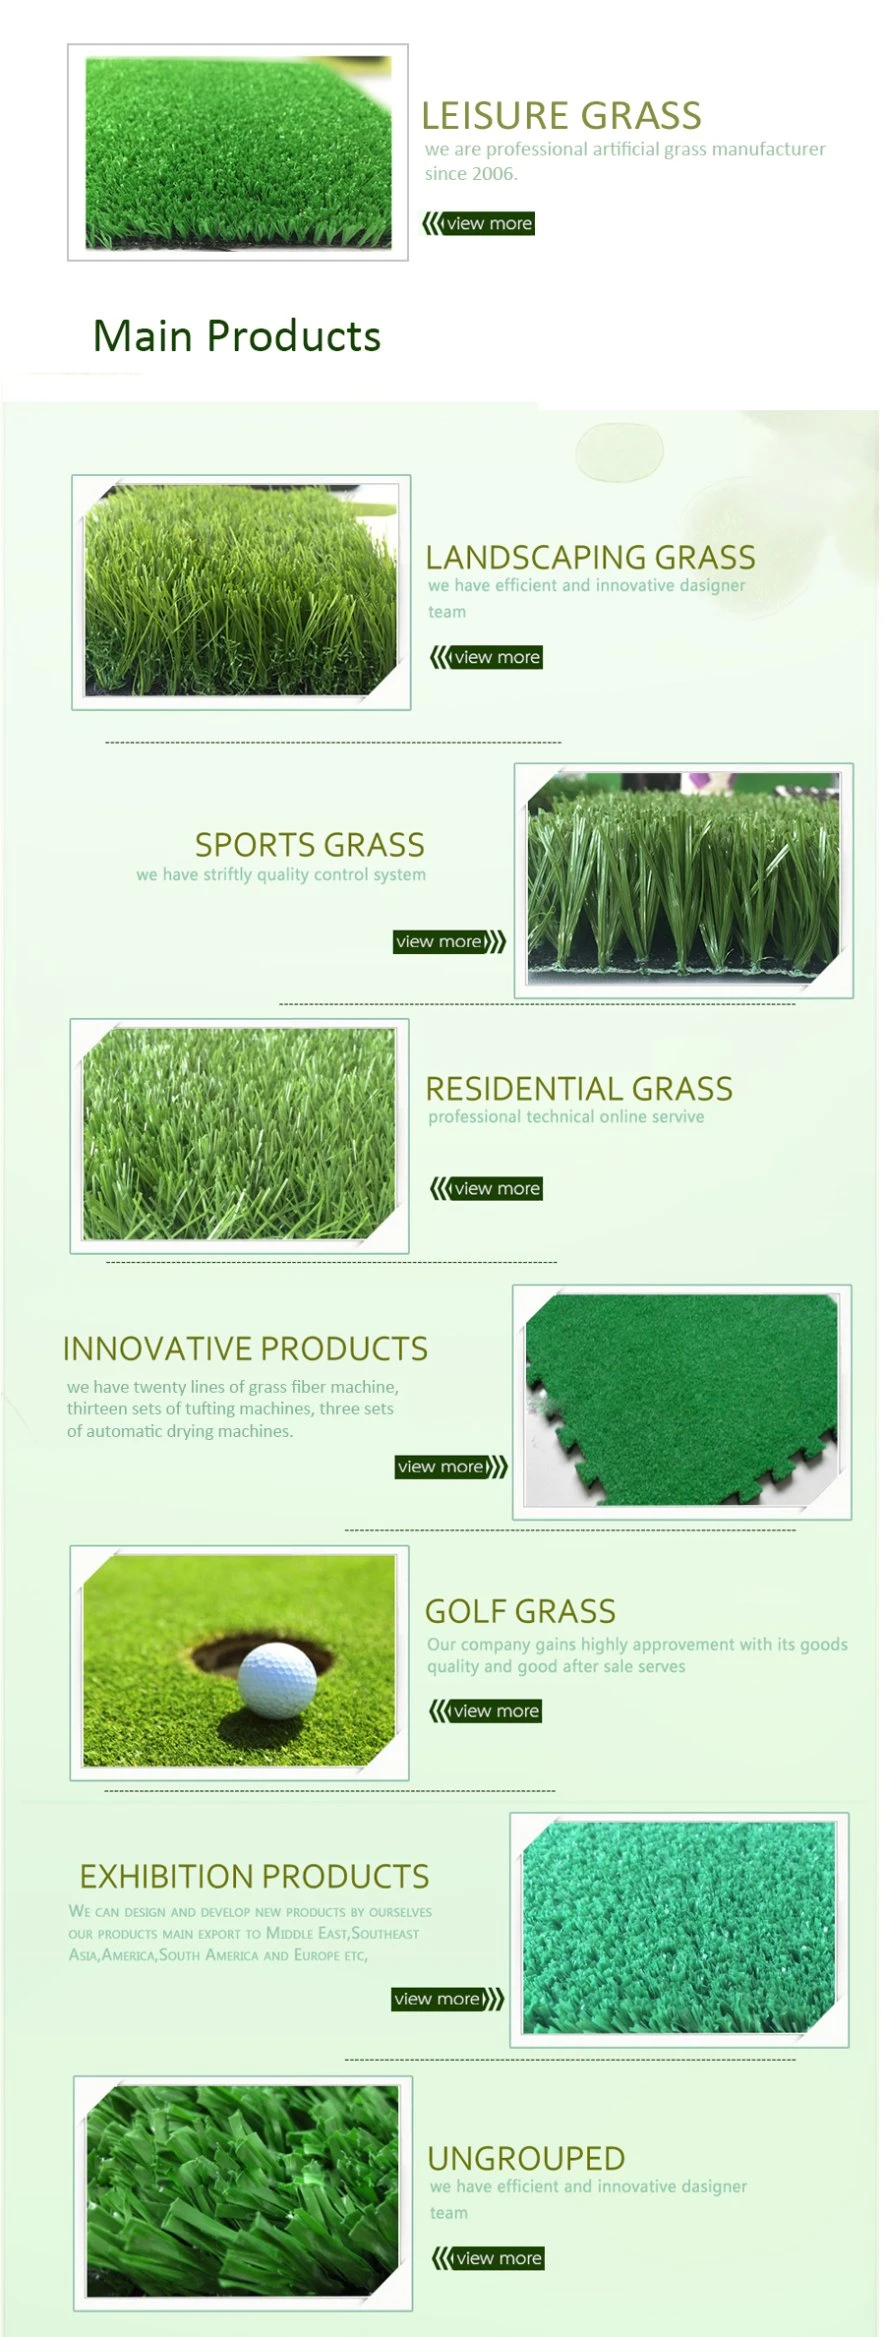 Natural Looking Green Artificial Grass Floor Carpet for Home Decoration